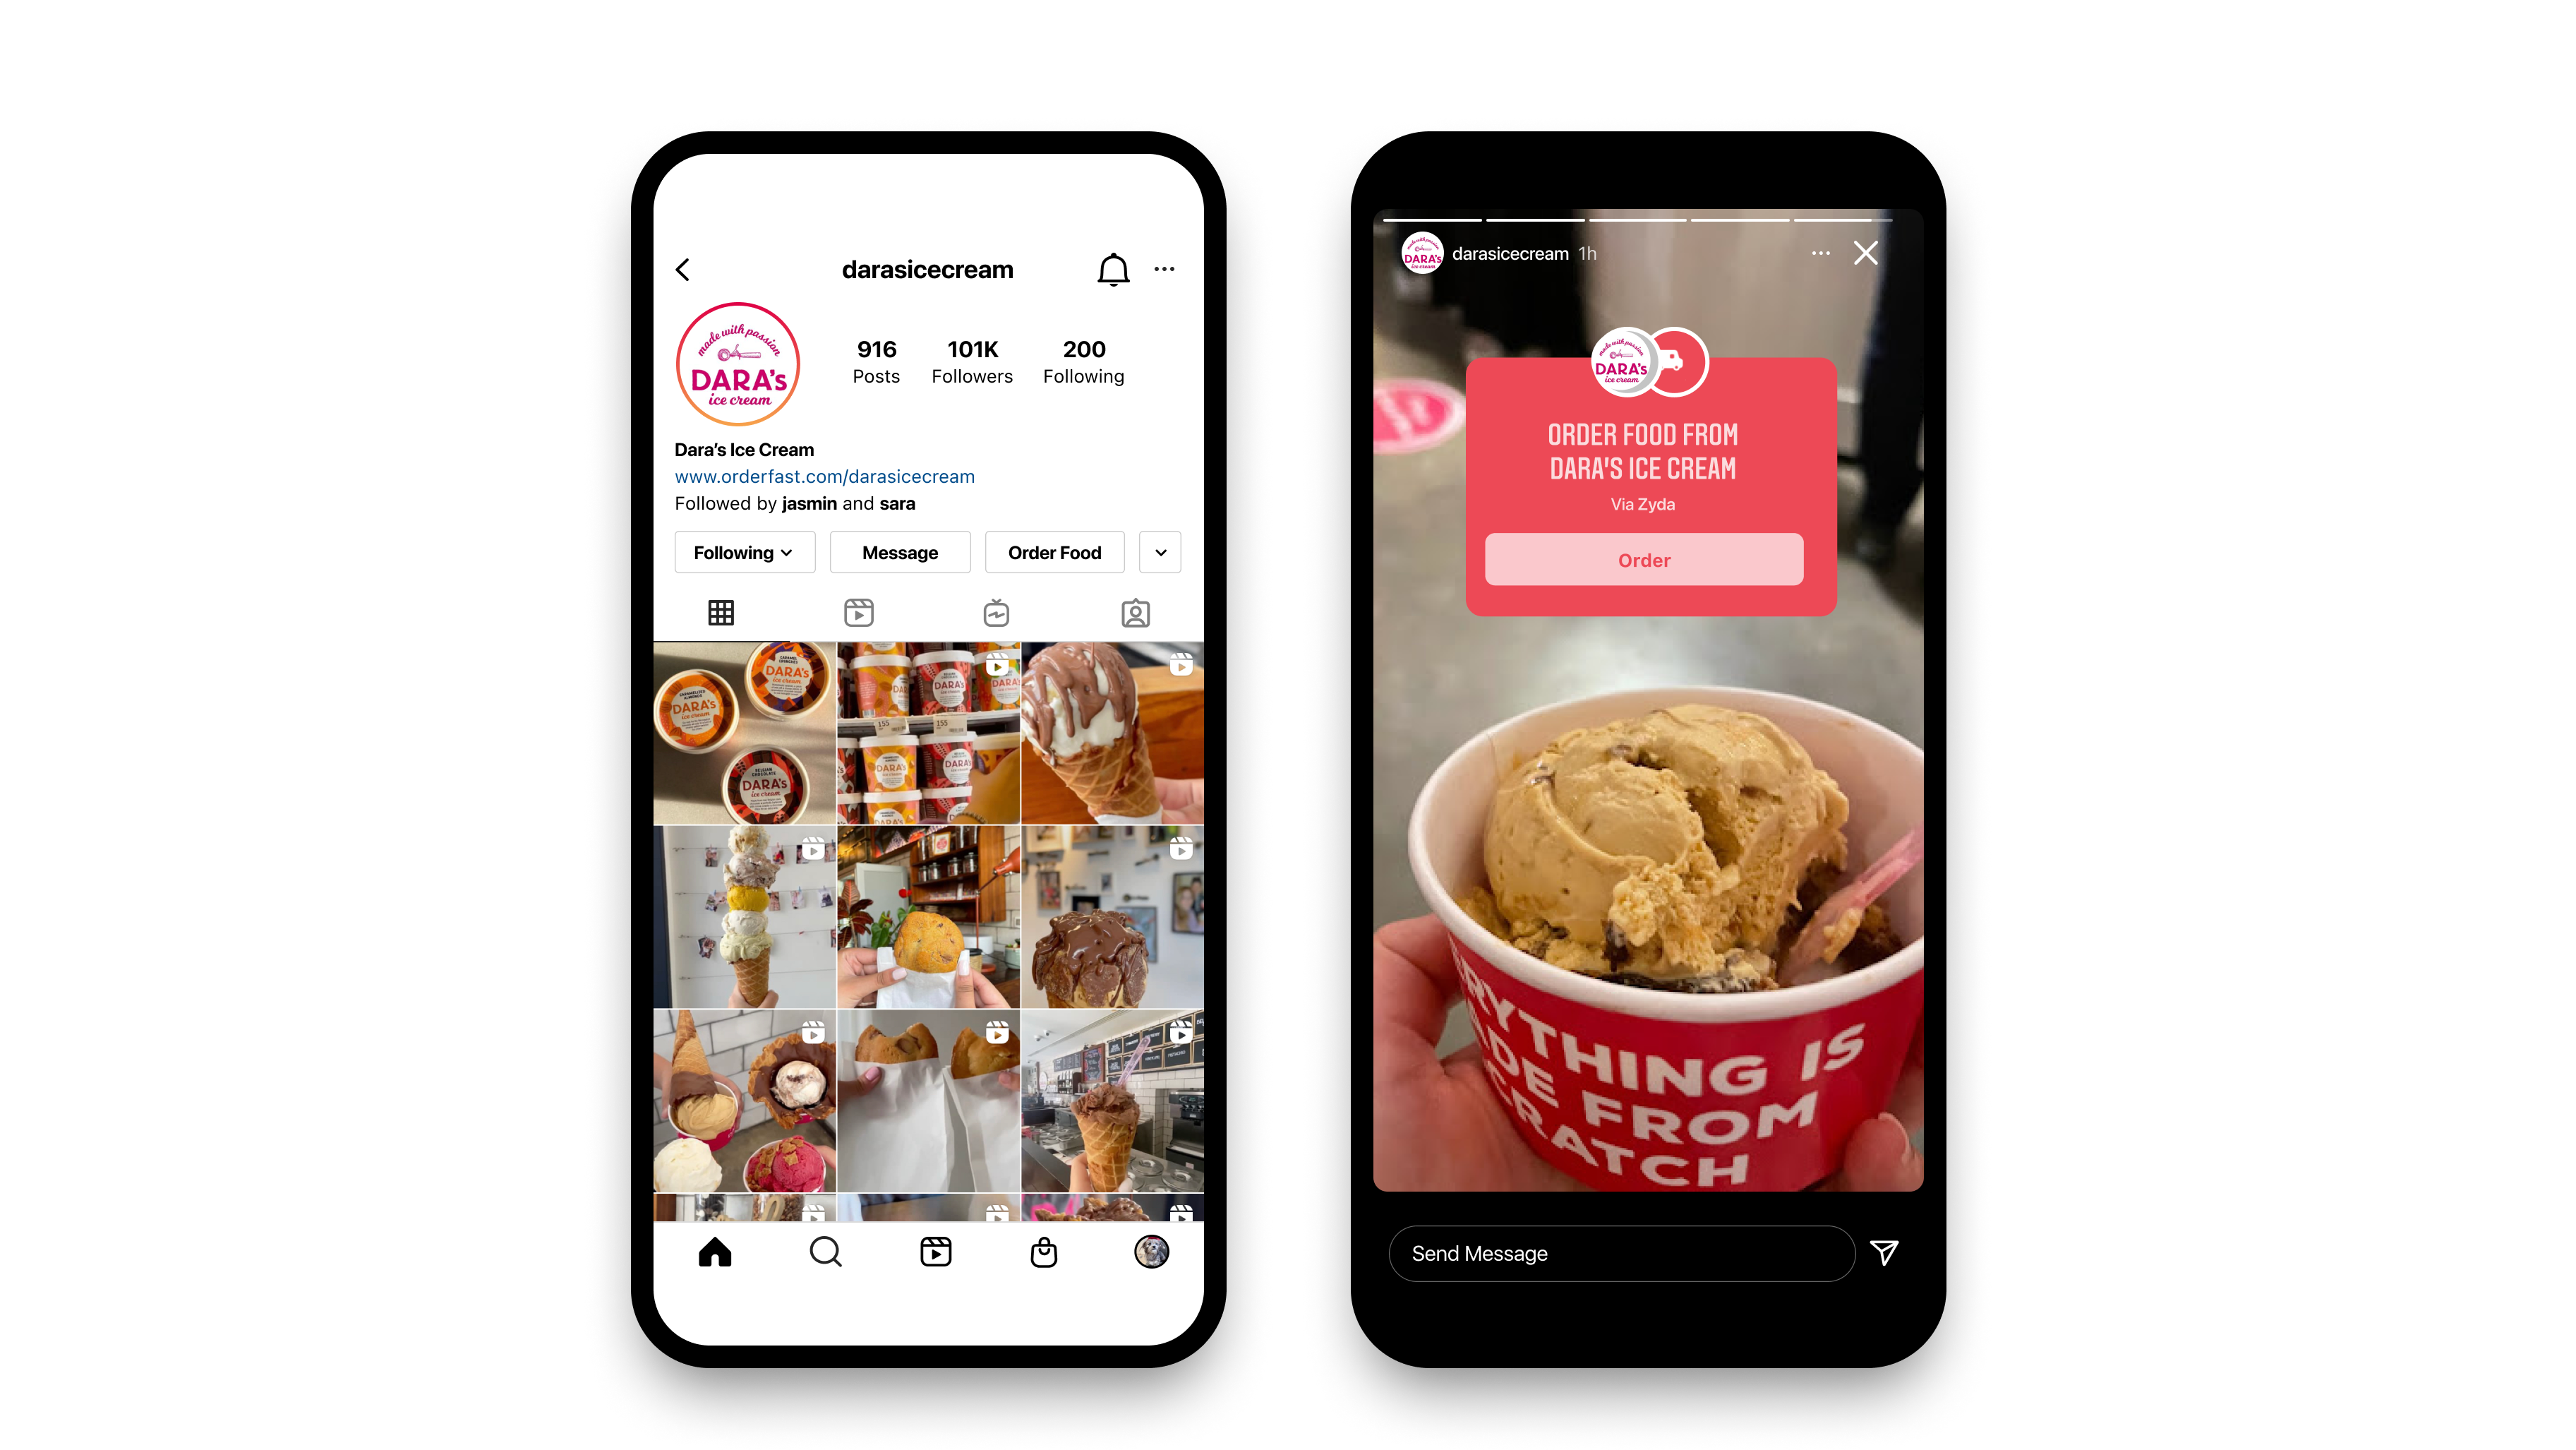 Order food button and Order food sticker on Instagram. Via Zyda.